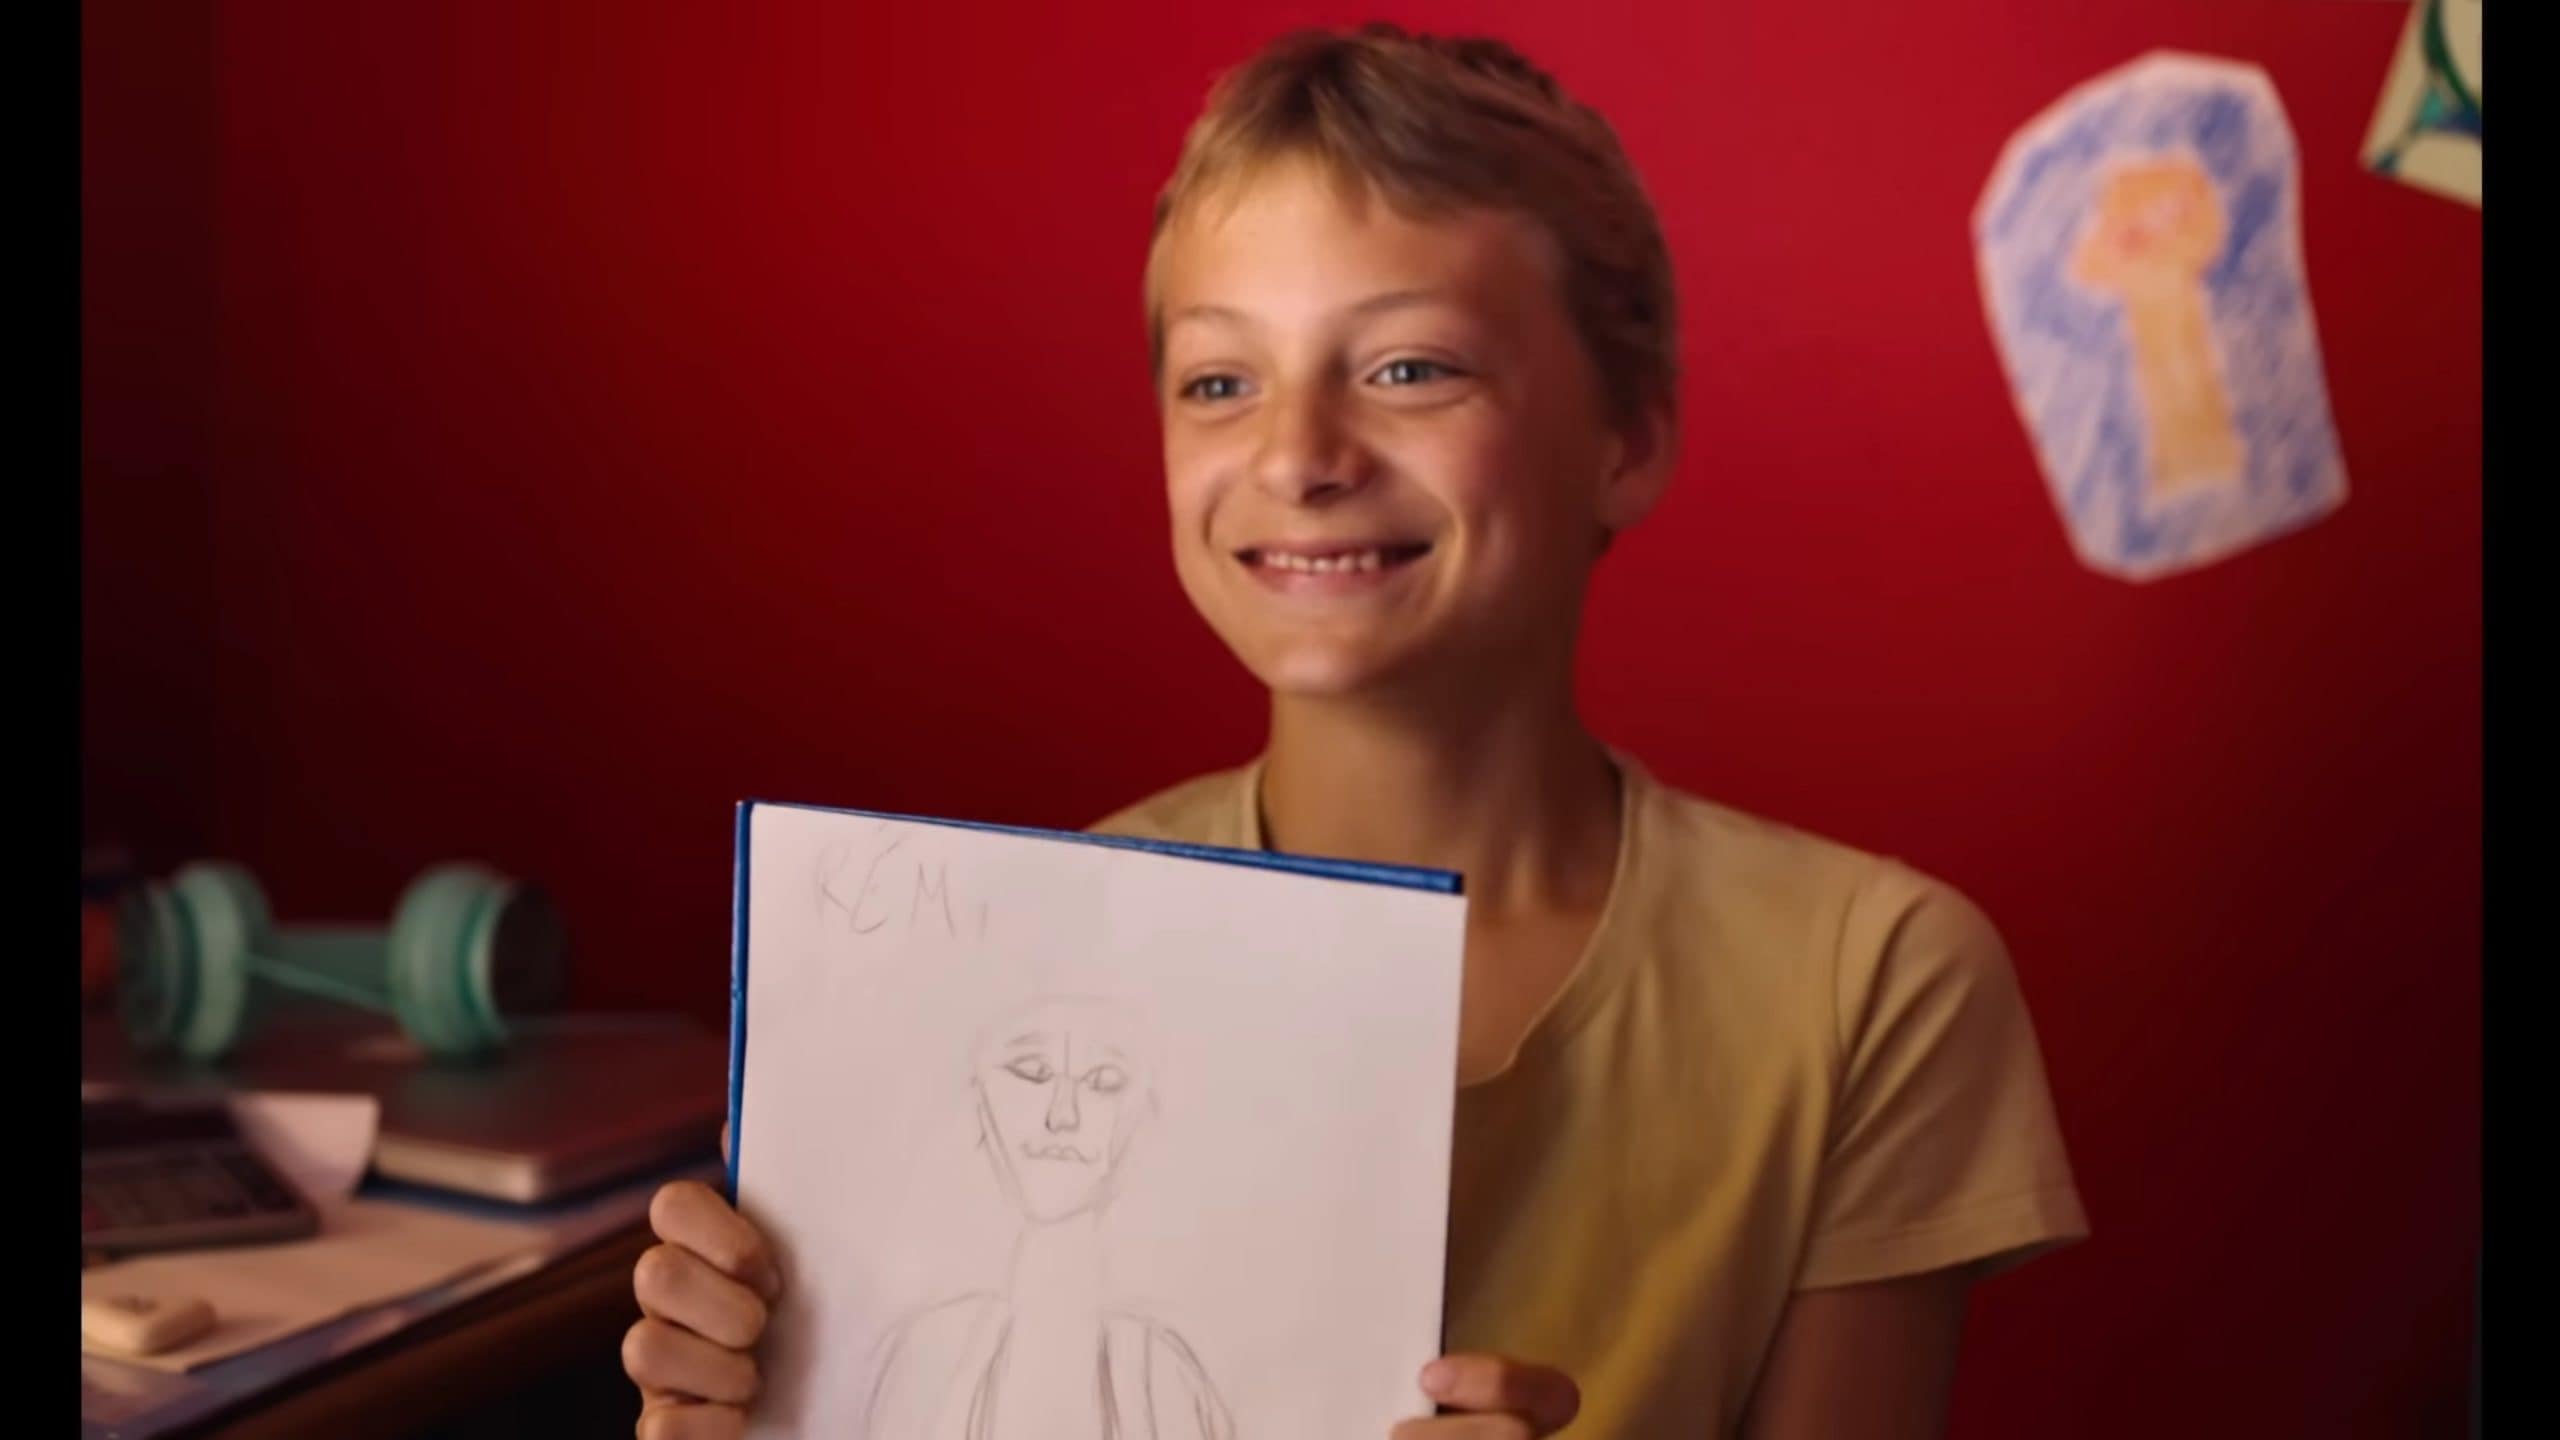 Leo (Eden Dambrine) smiling and showing Remi a picture he drew of him